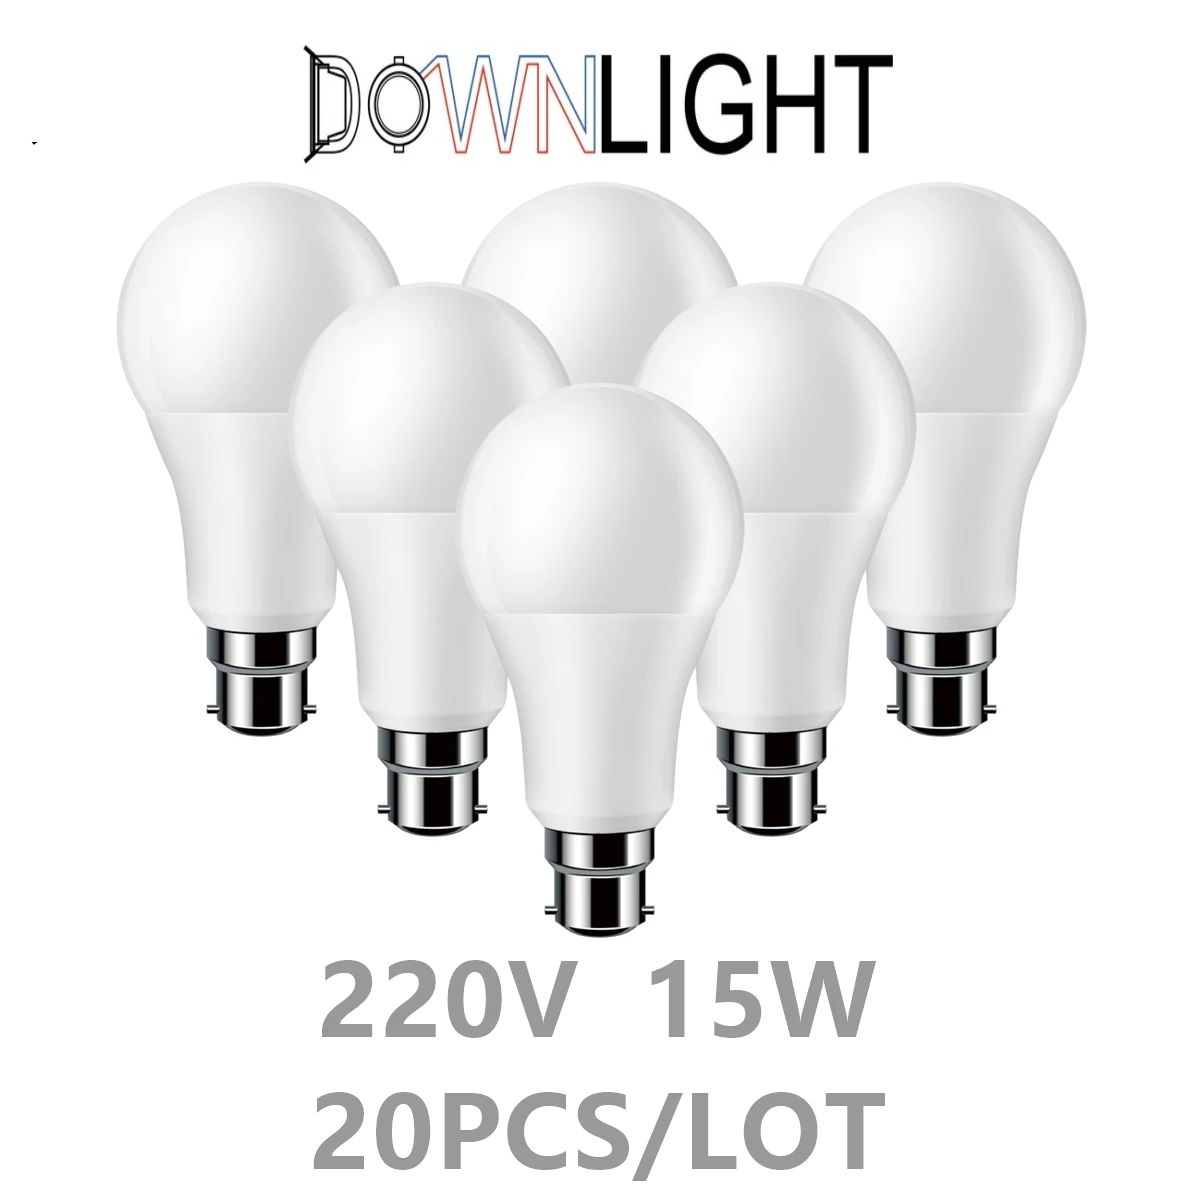 20PCS Factory direct LED bulb lamp 220V 15W 18W E27 B22 high power high lumen is suitable for kitchen, living room and office